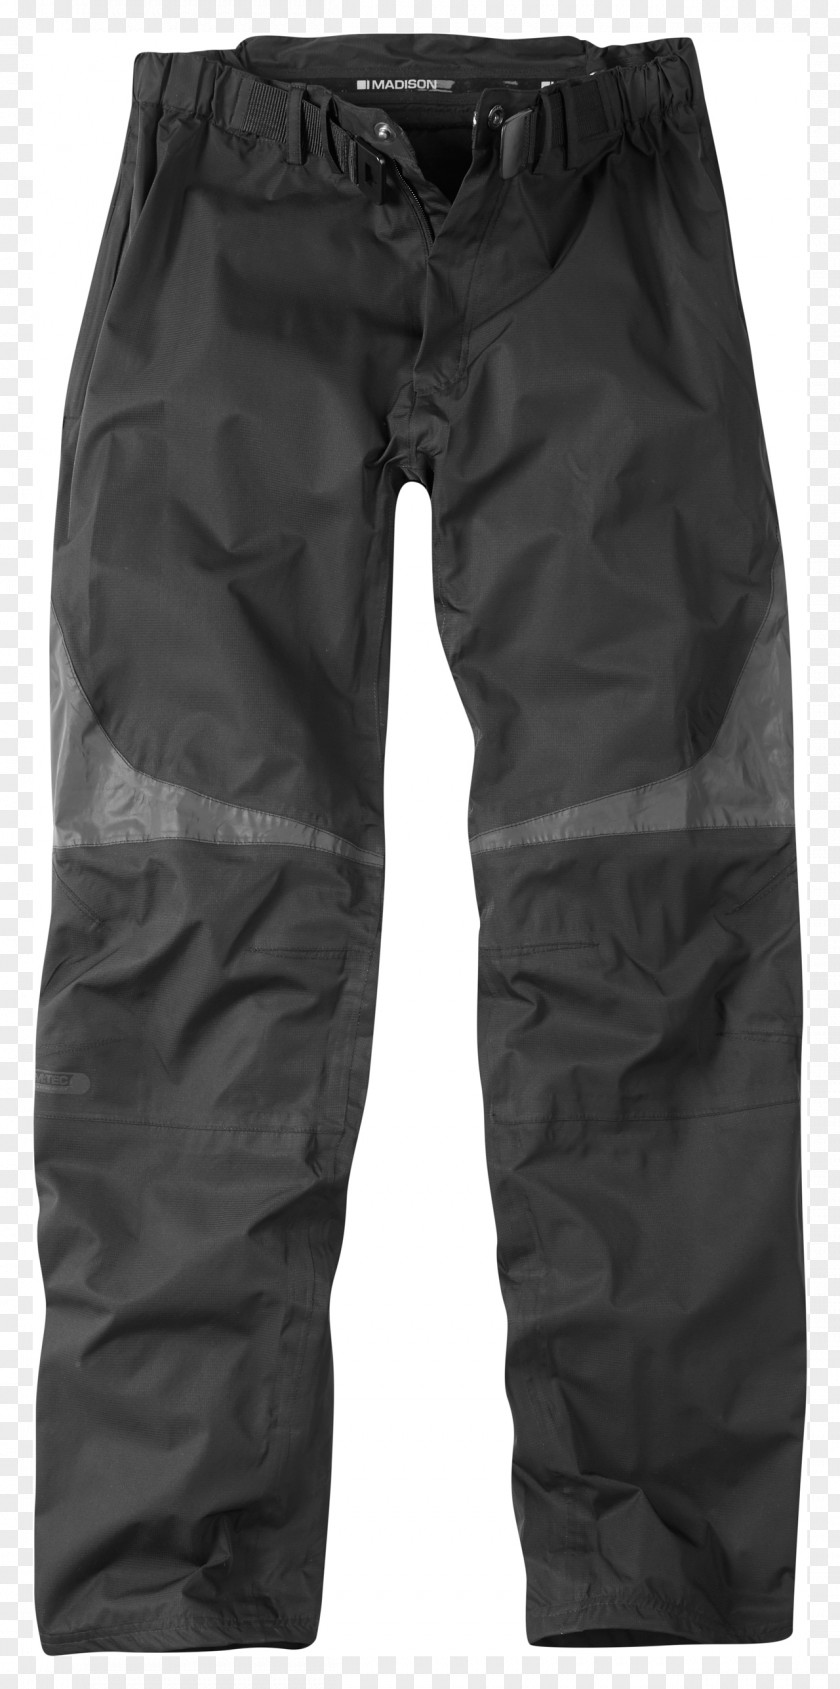 Trousers Pants Carhartt Clothing Dungaree Workwear PNG